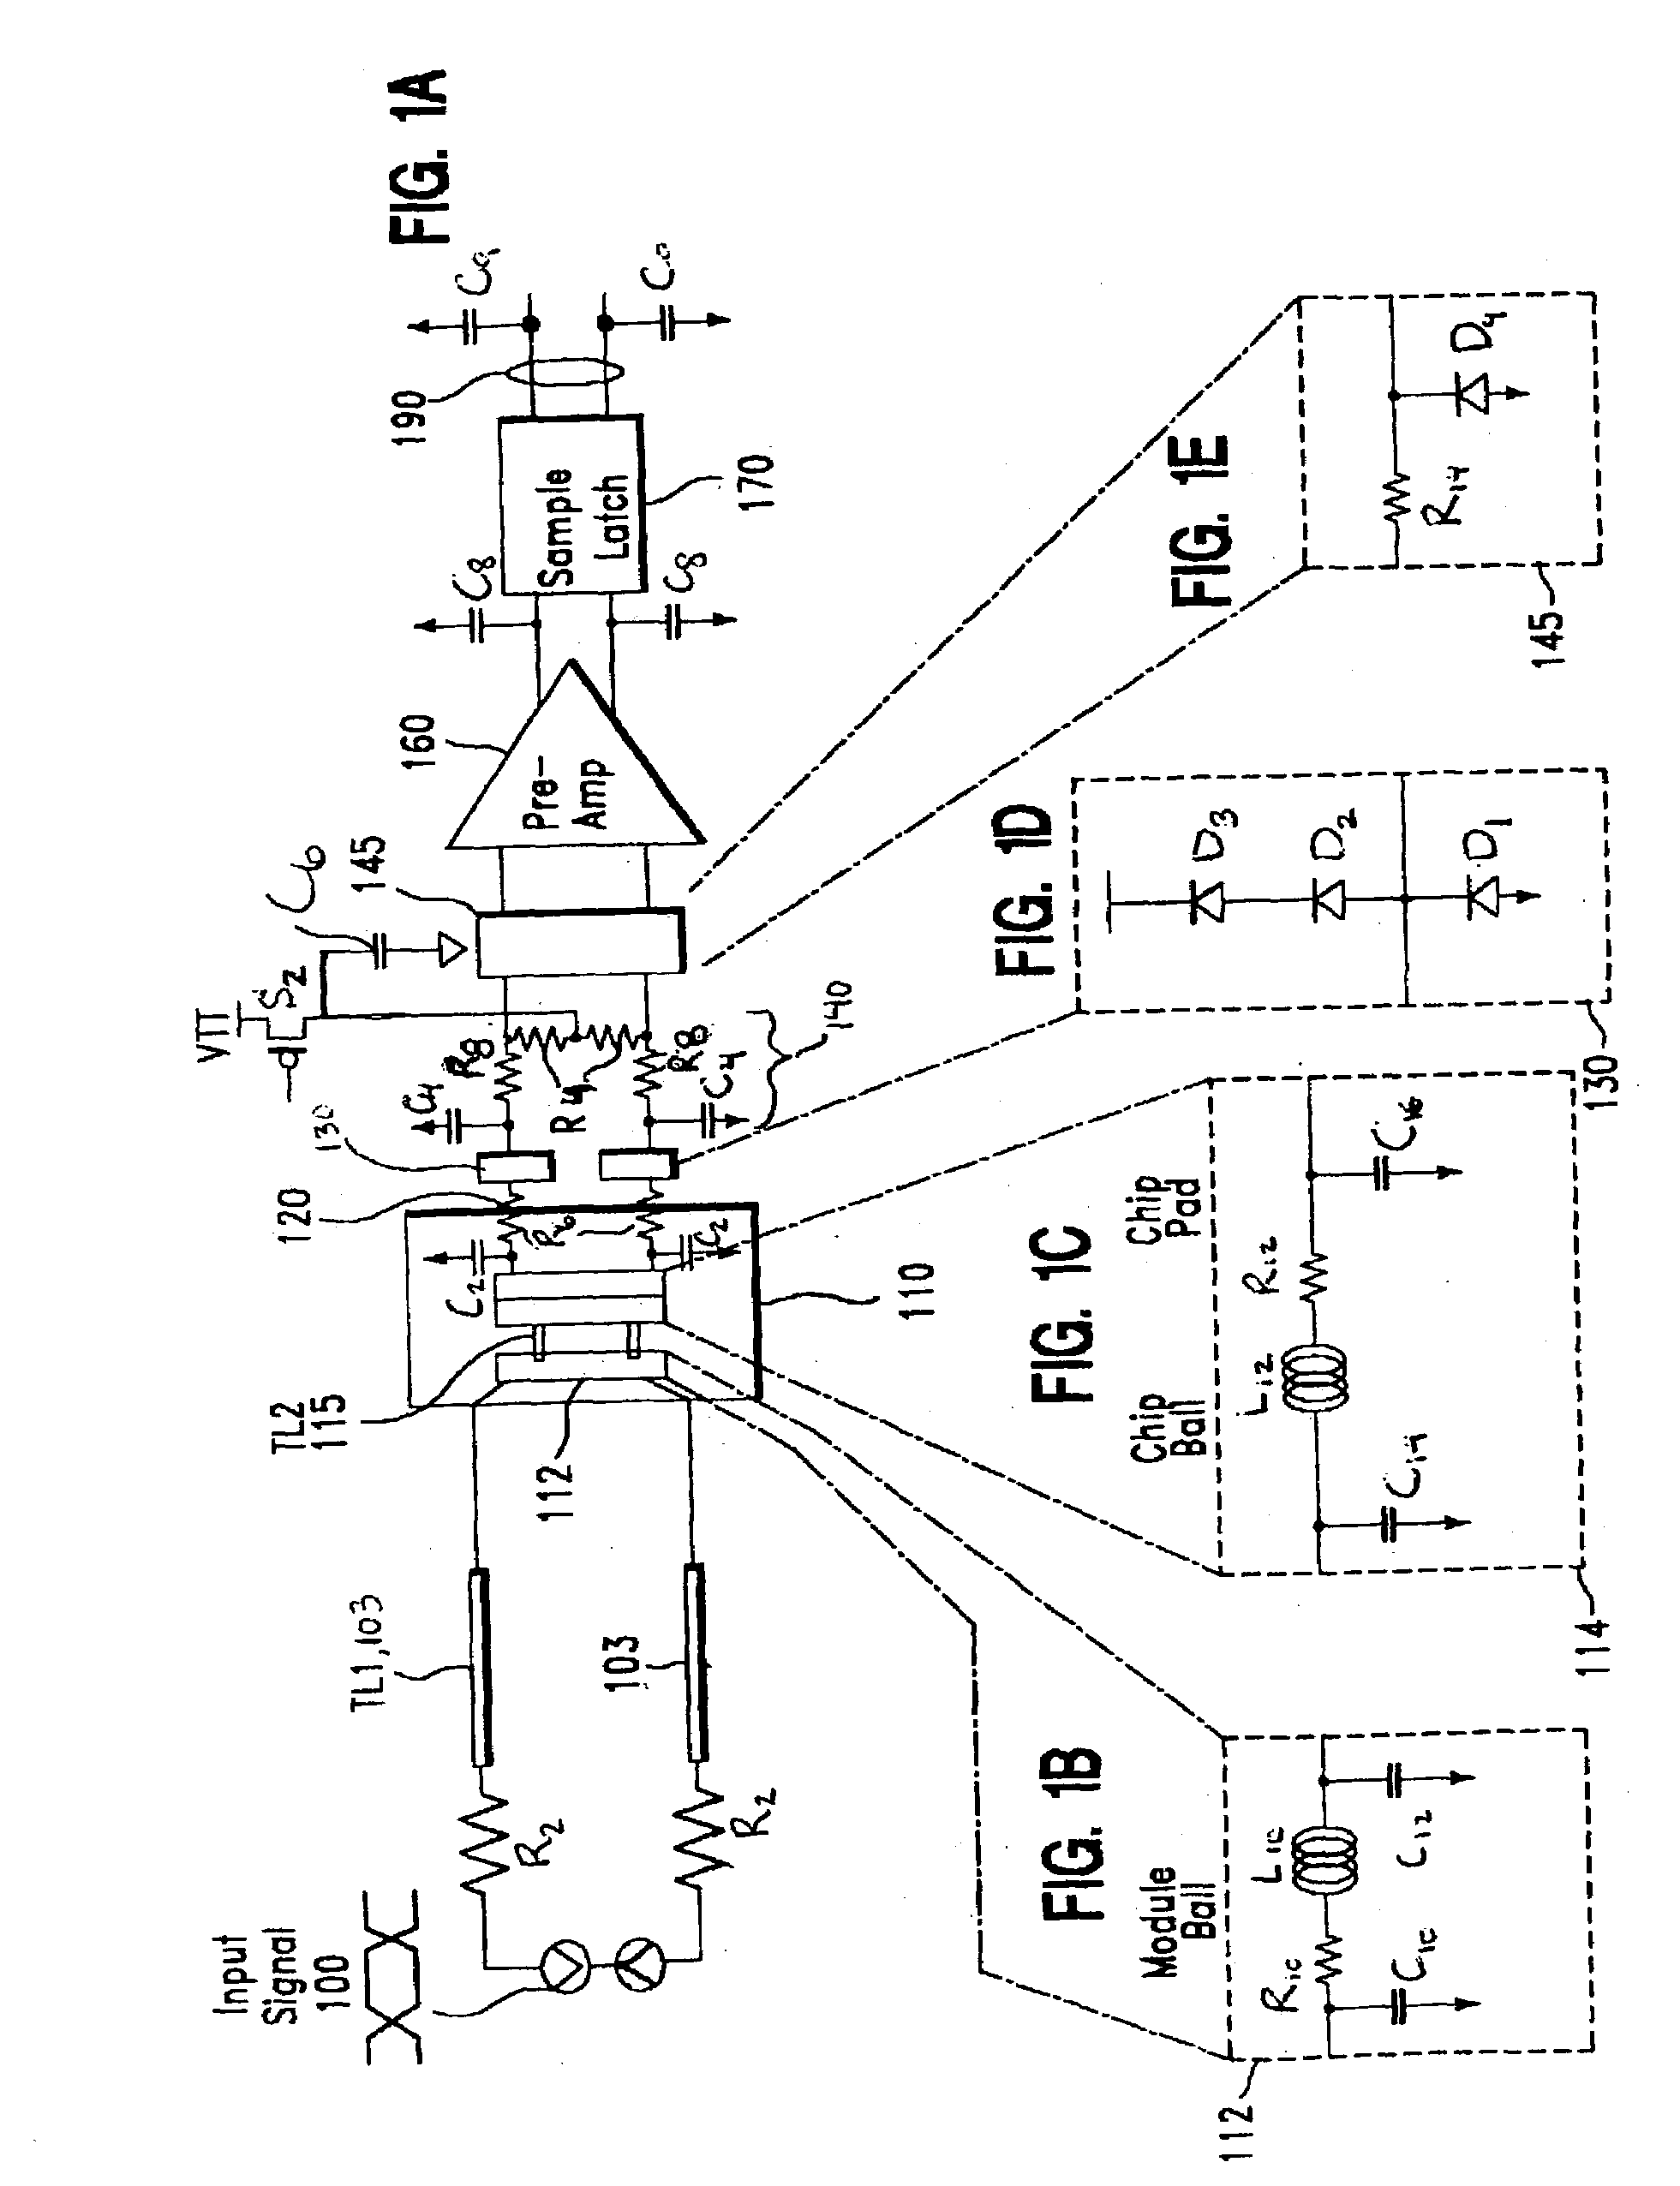 Programmable impedance matching circuit and method